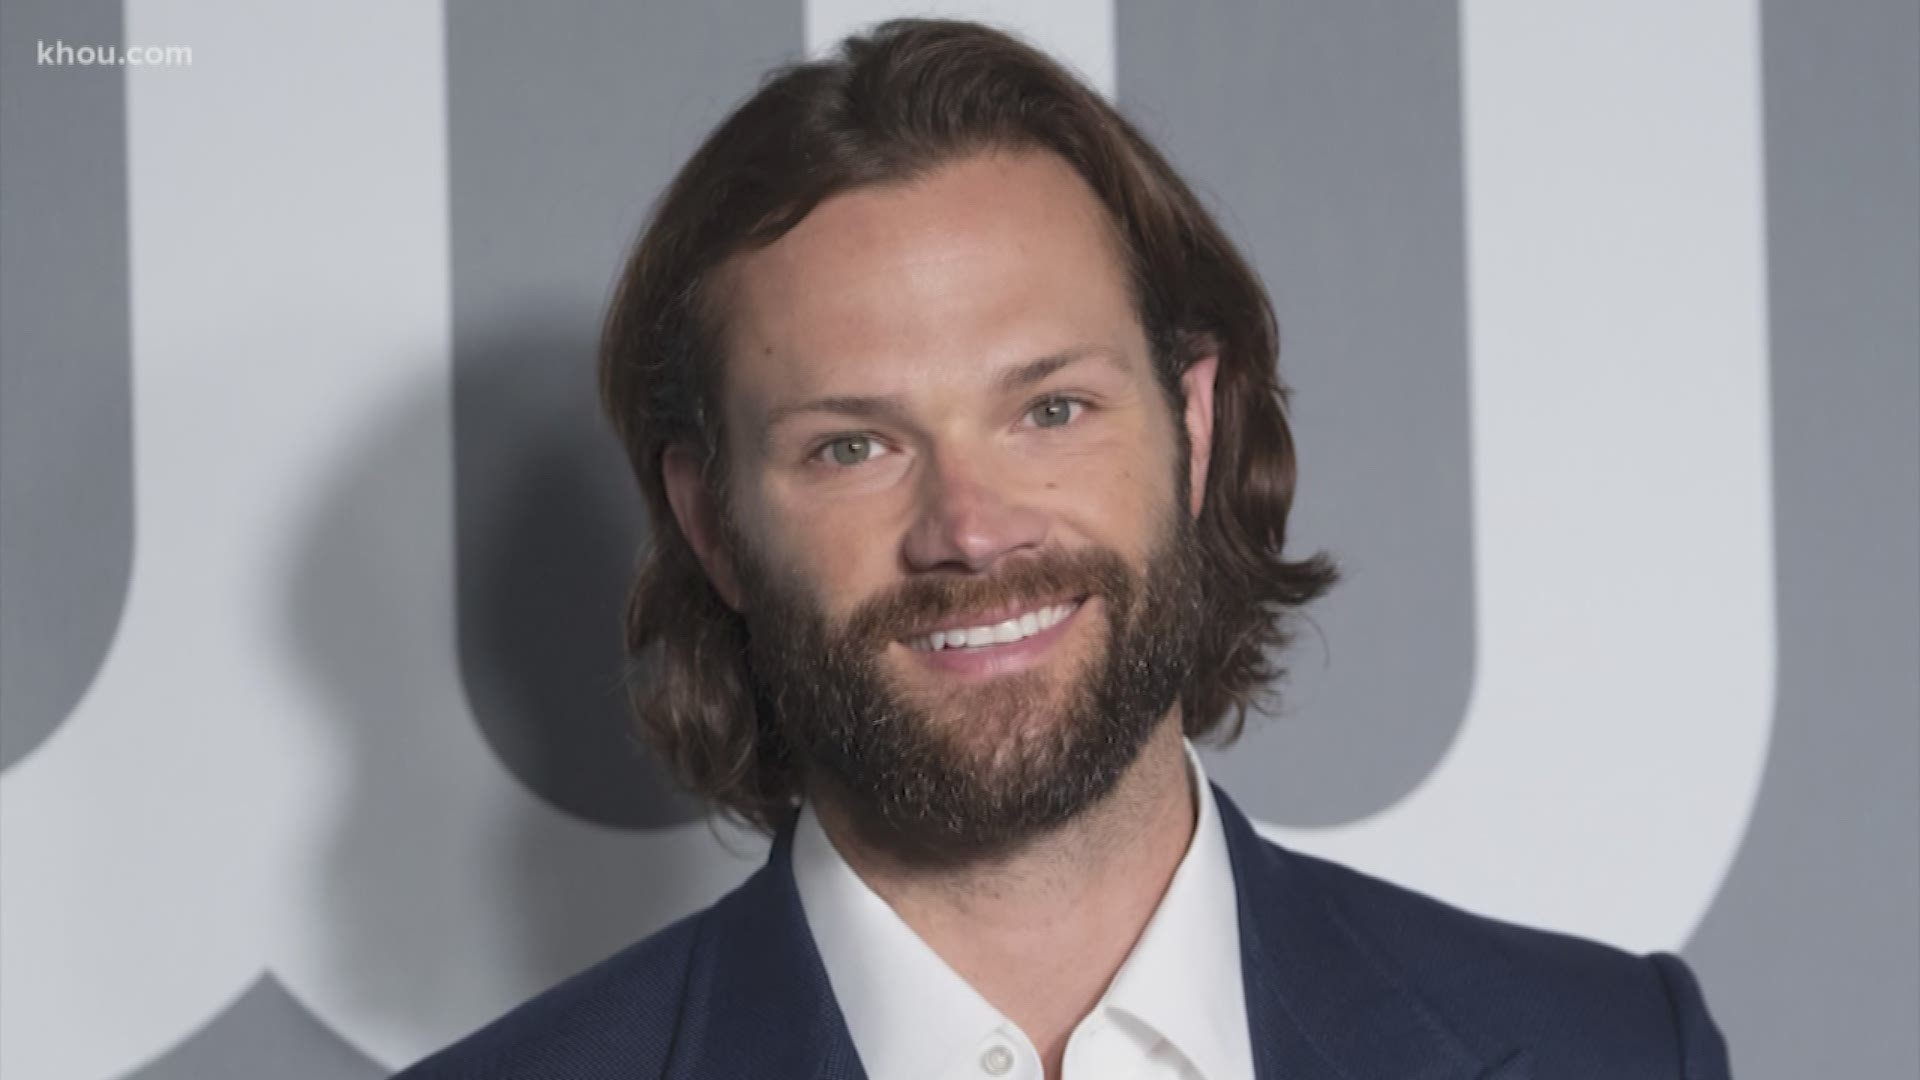 Austin police arrested Jared Padalecki for a bar fight -- and he owns the bar!